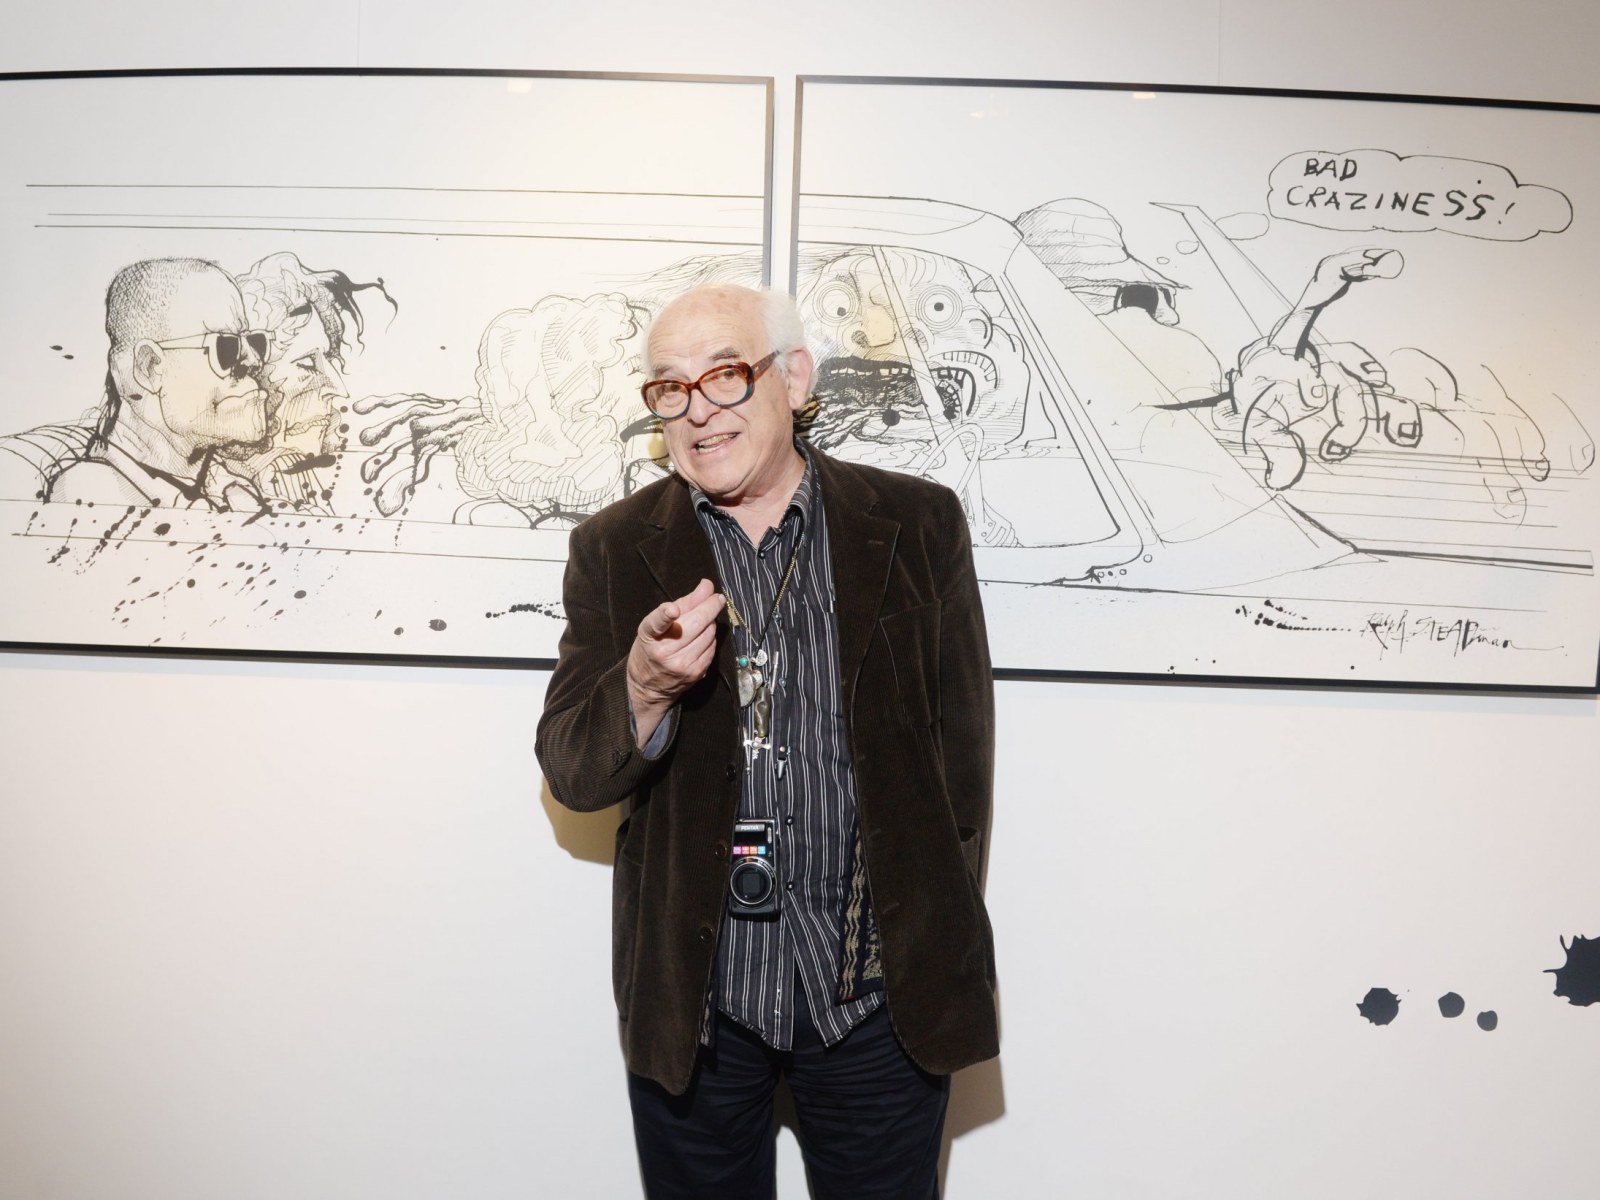 Ralph Steadman on Charlie Hebdo, the Right to Offend and Changing the World